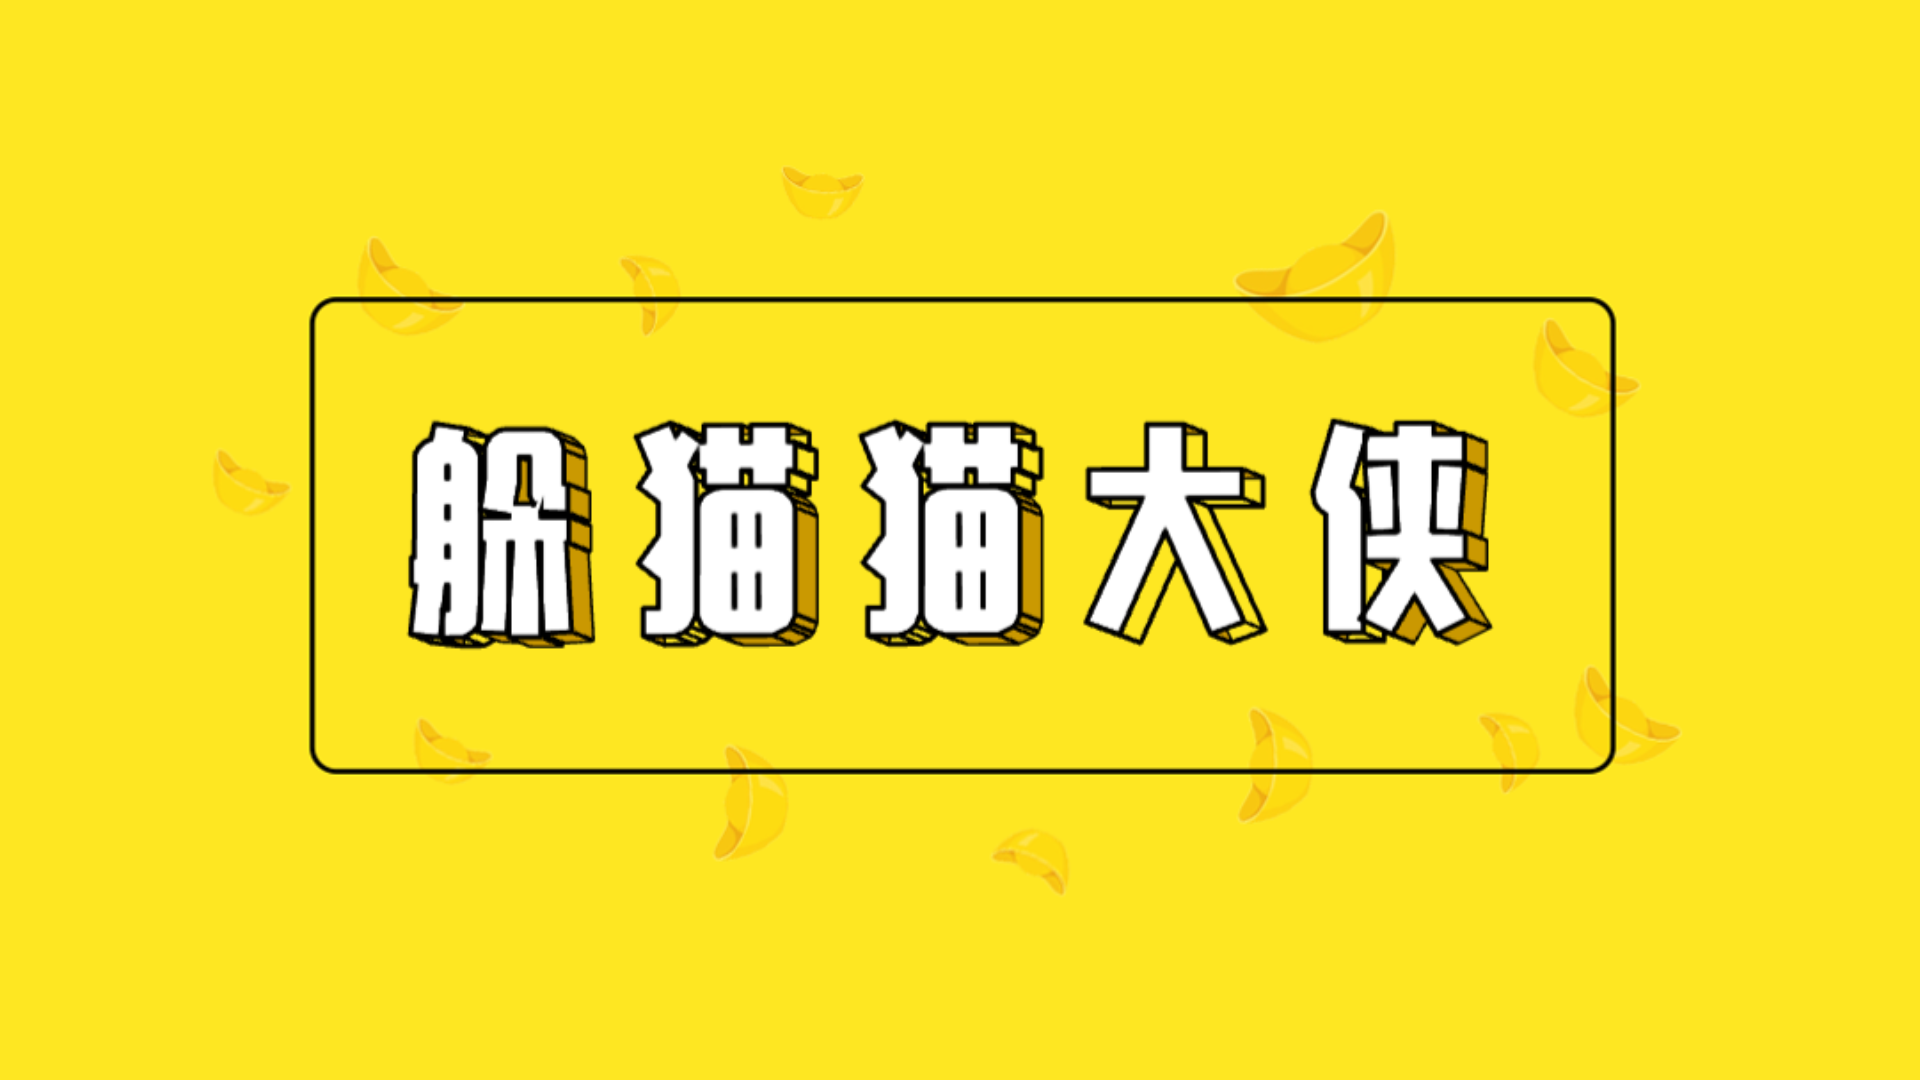 Banner of ピーカブー 0.1